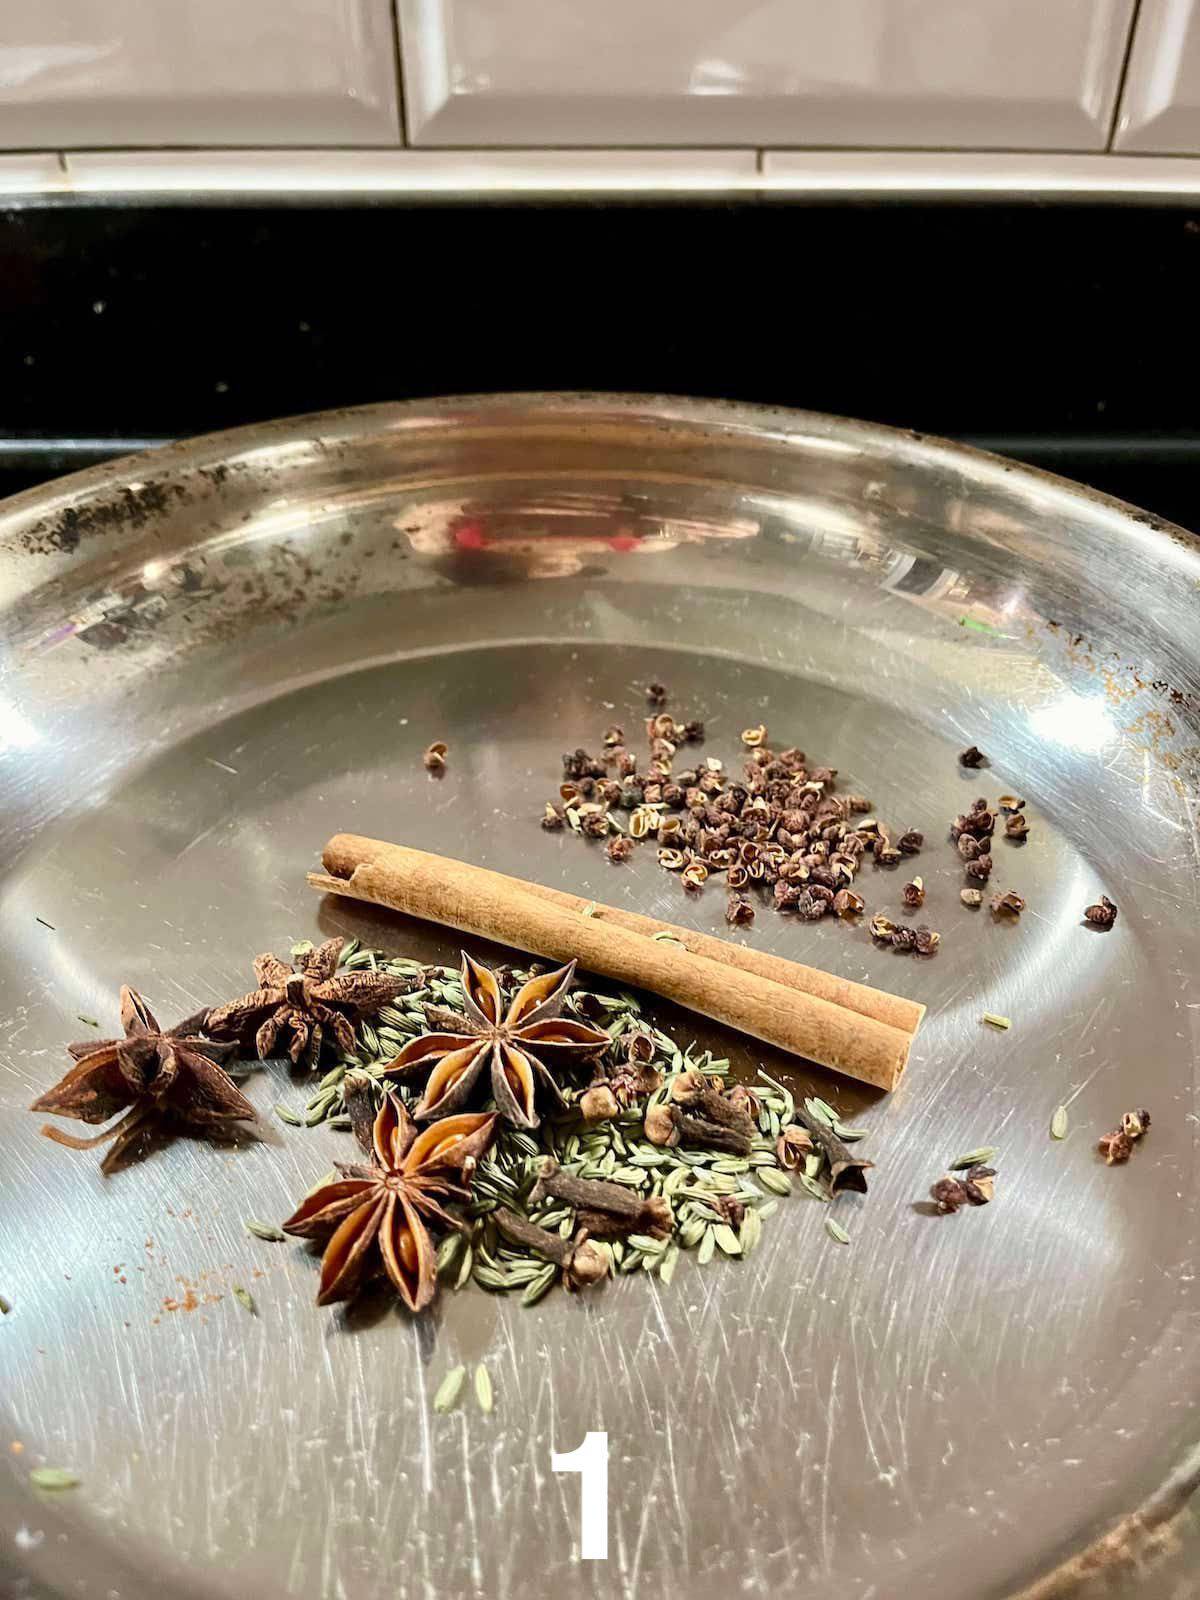 Whole spices being dry fried in a stainless steel pan.